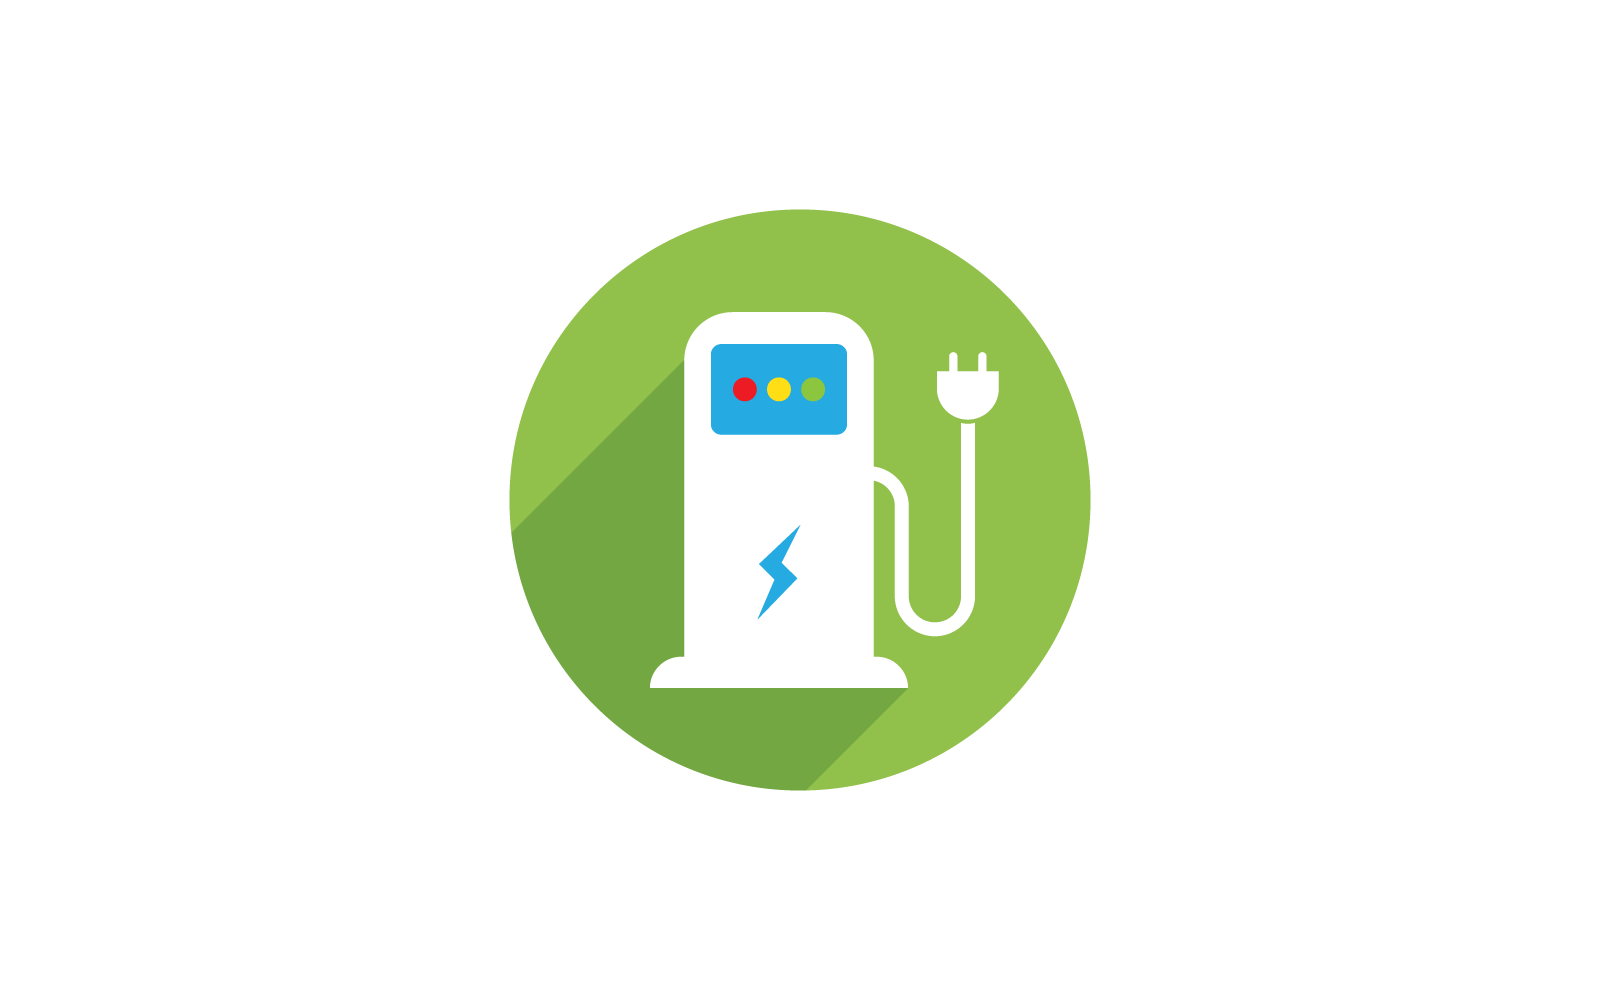 Electrical charging station vector logo icon flat design